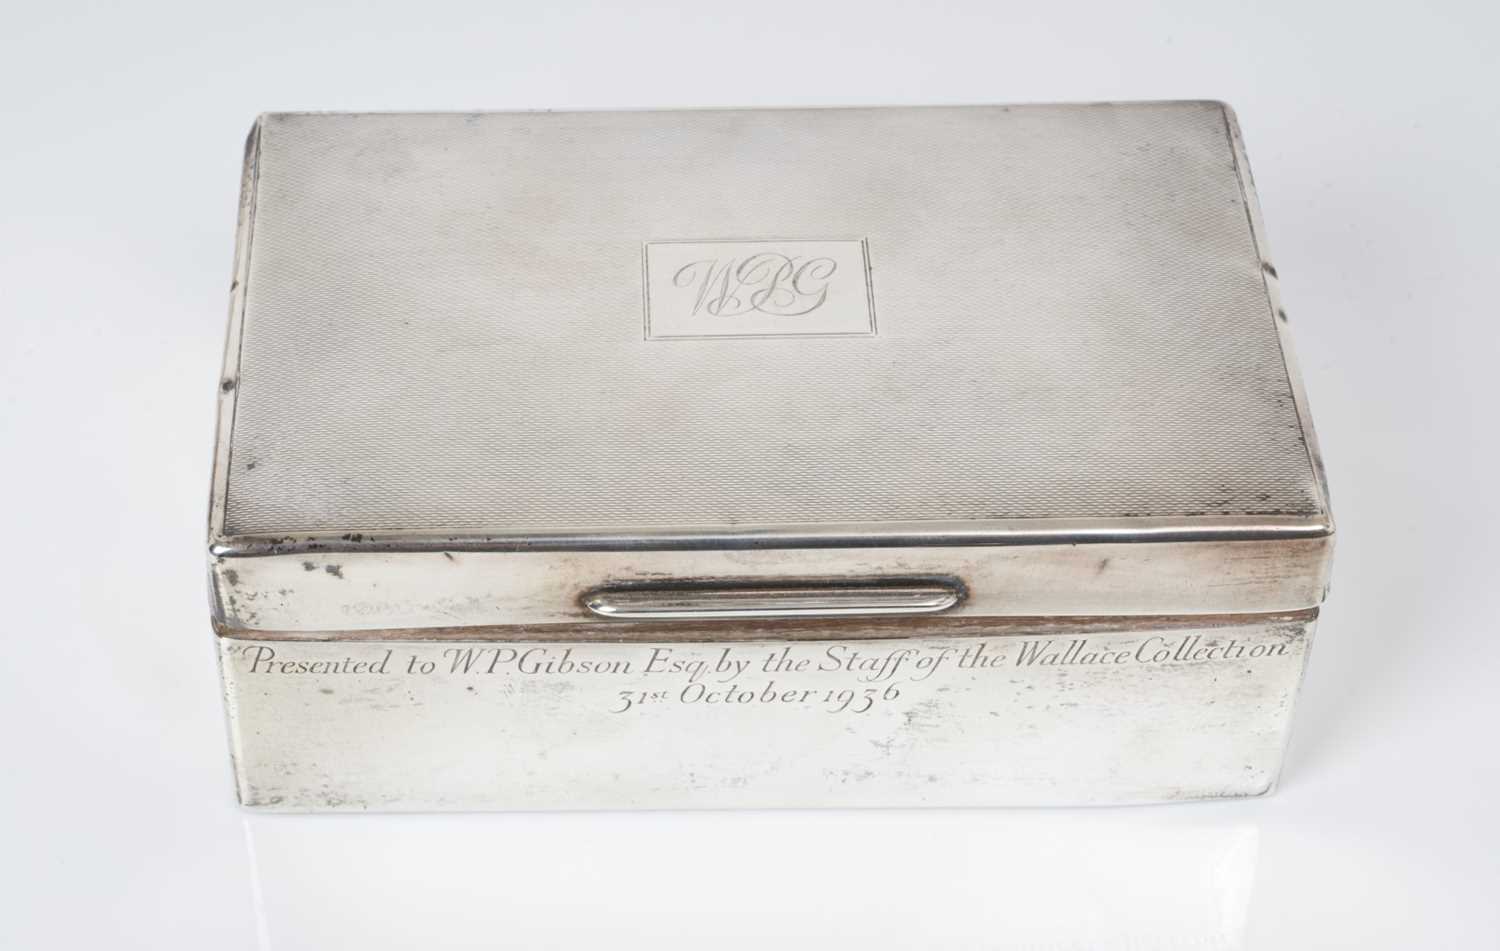 George V silver cigarette box of rectangular form with engine turned decoration and engraved present